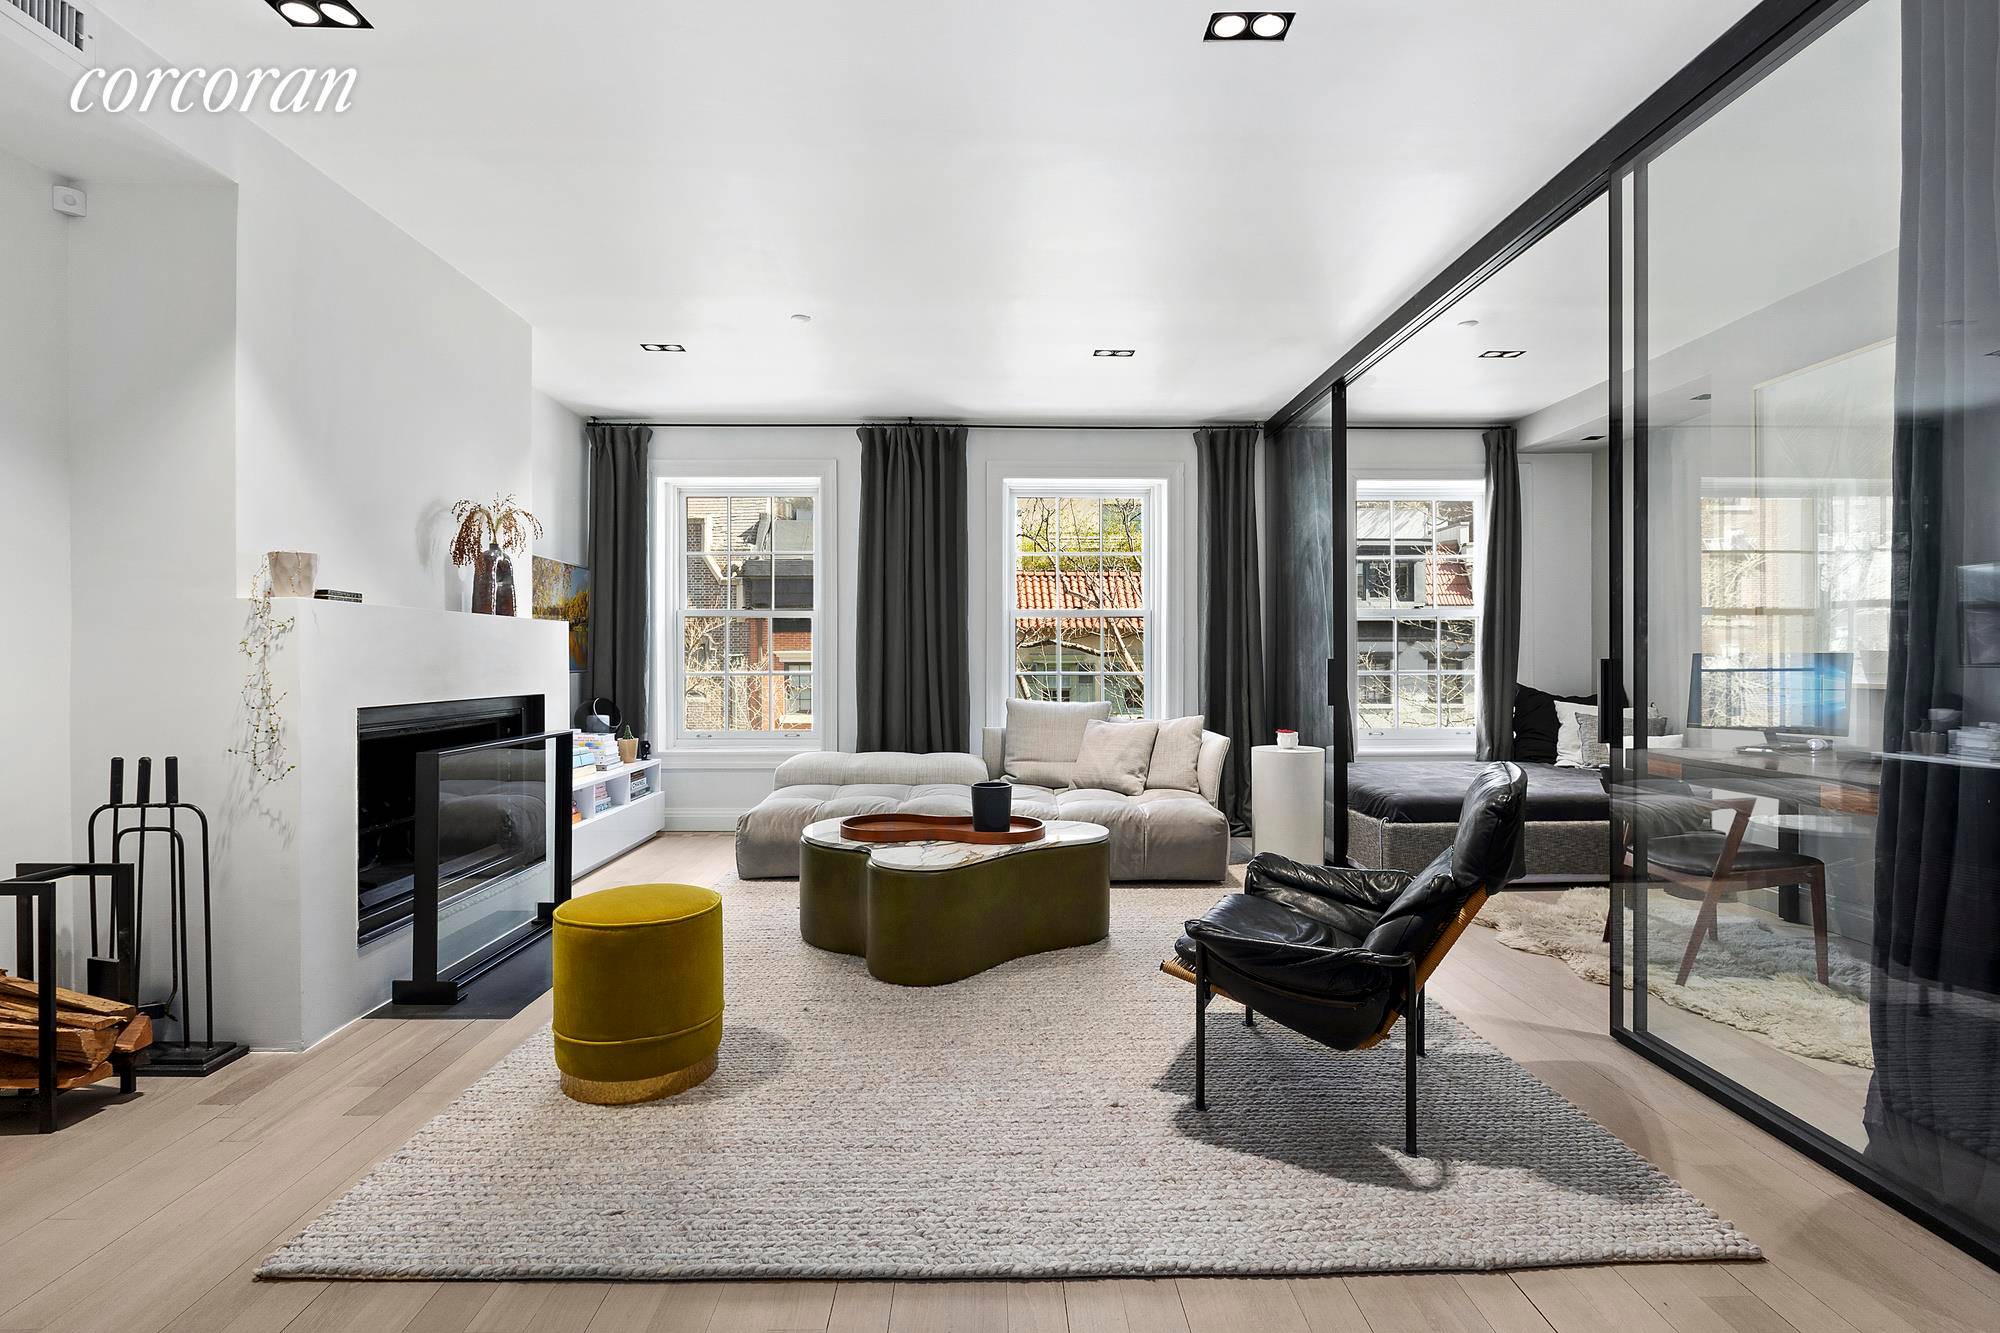 Introducing Gramercy's most charming duplex.